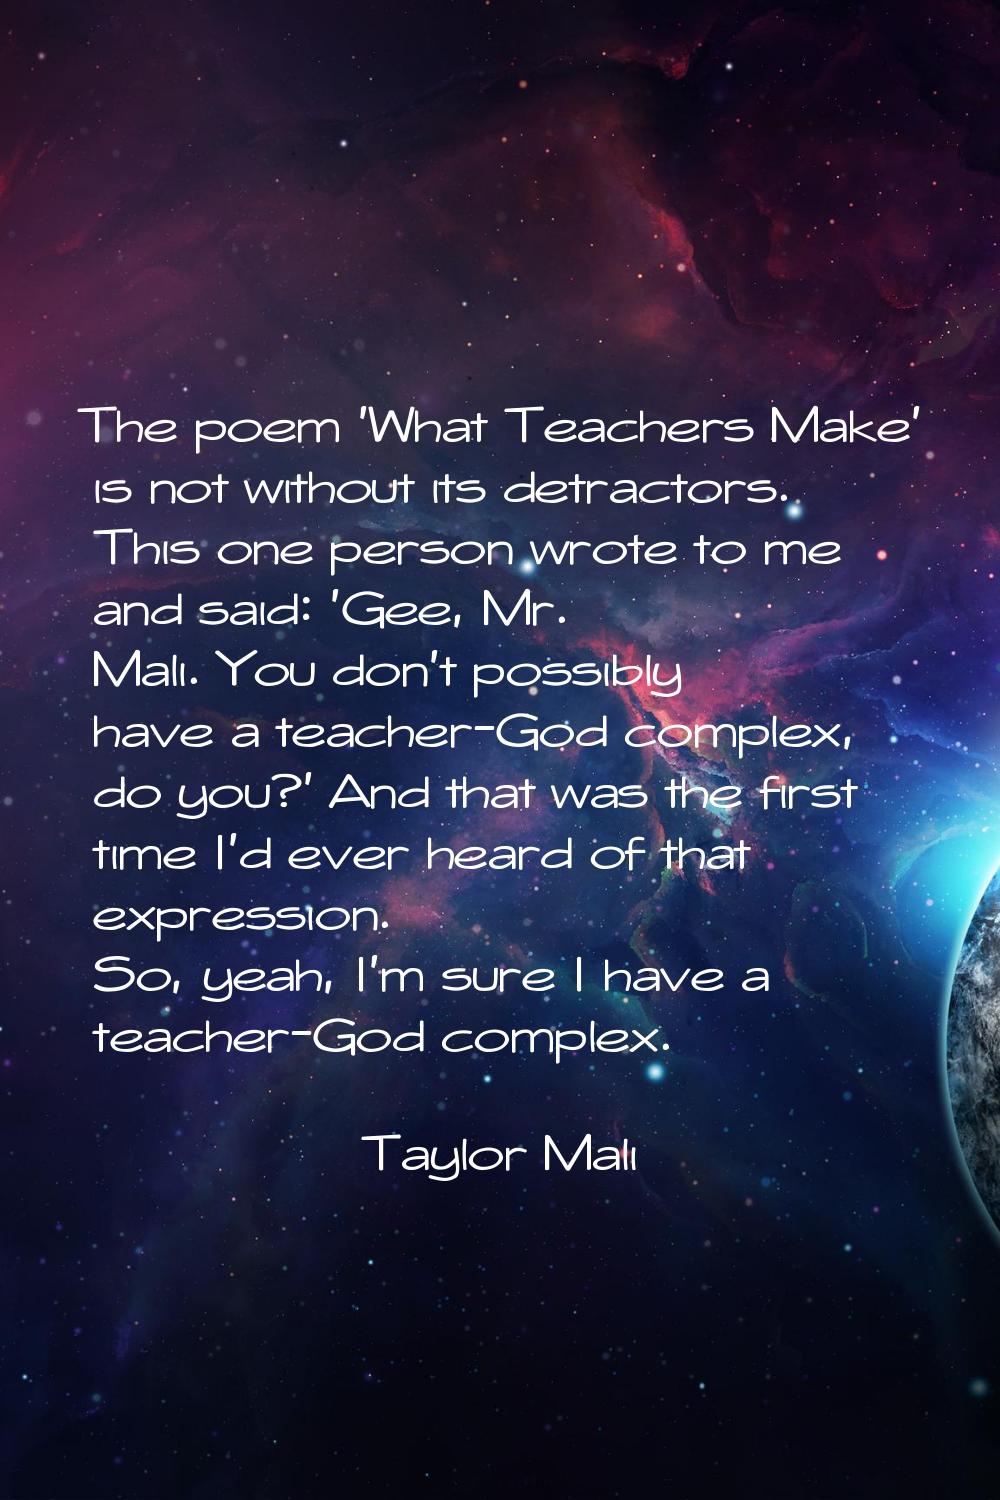 The poem 'What Teachers Make' is not without its detractors. This one person wrote to me and said: 